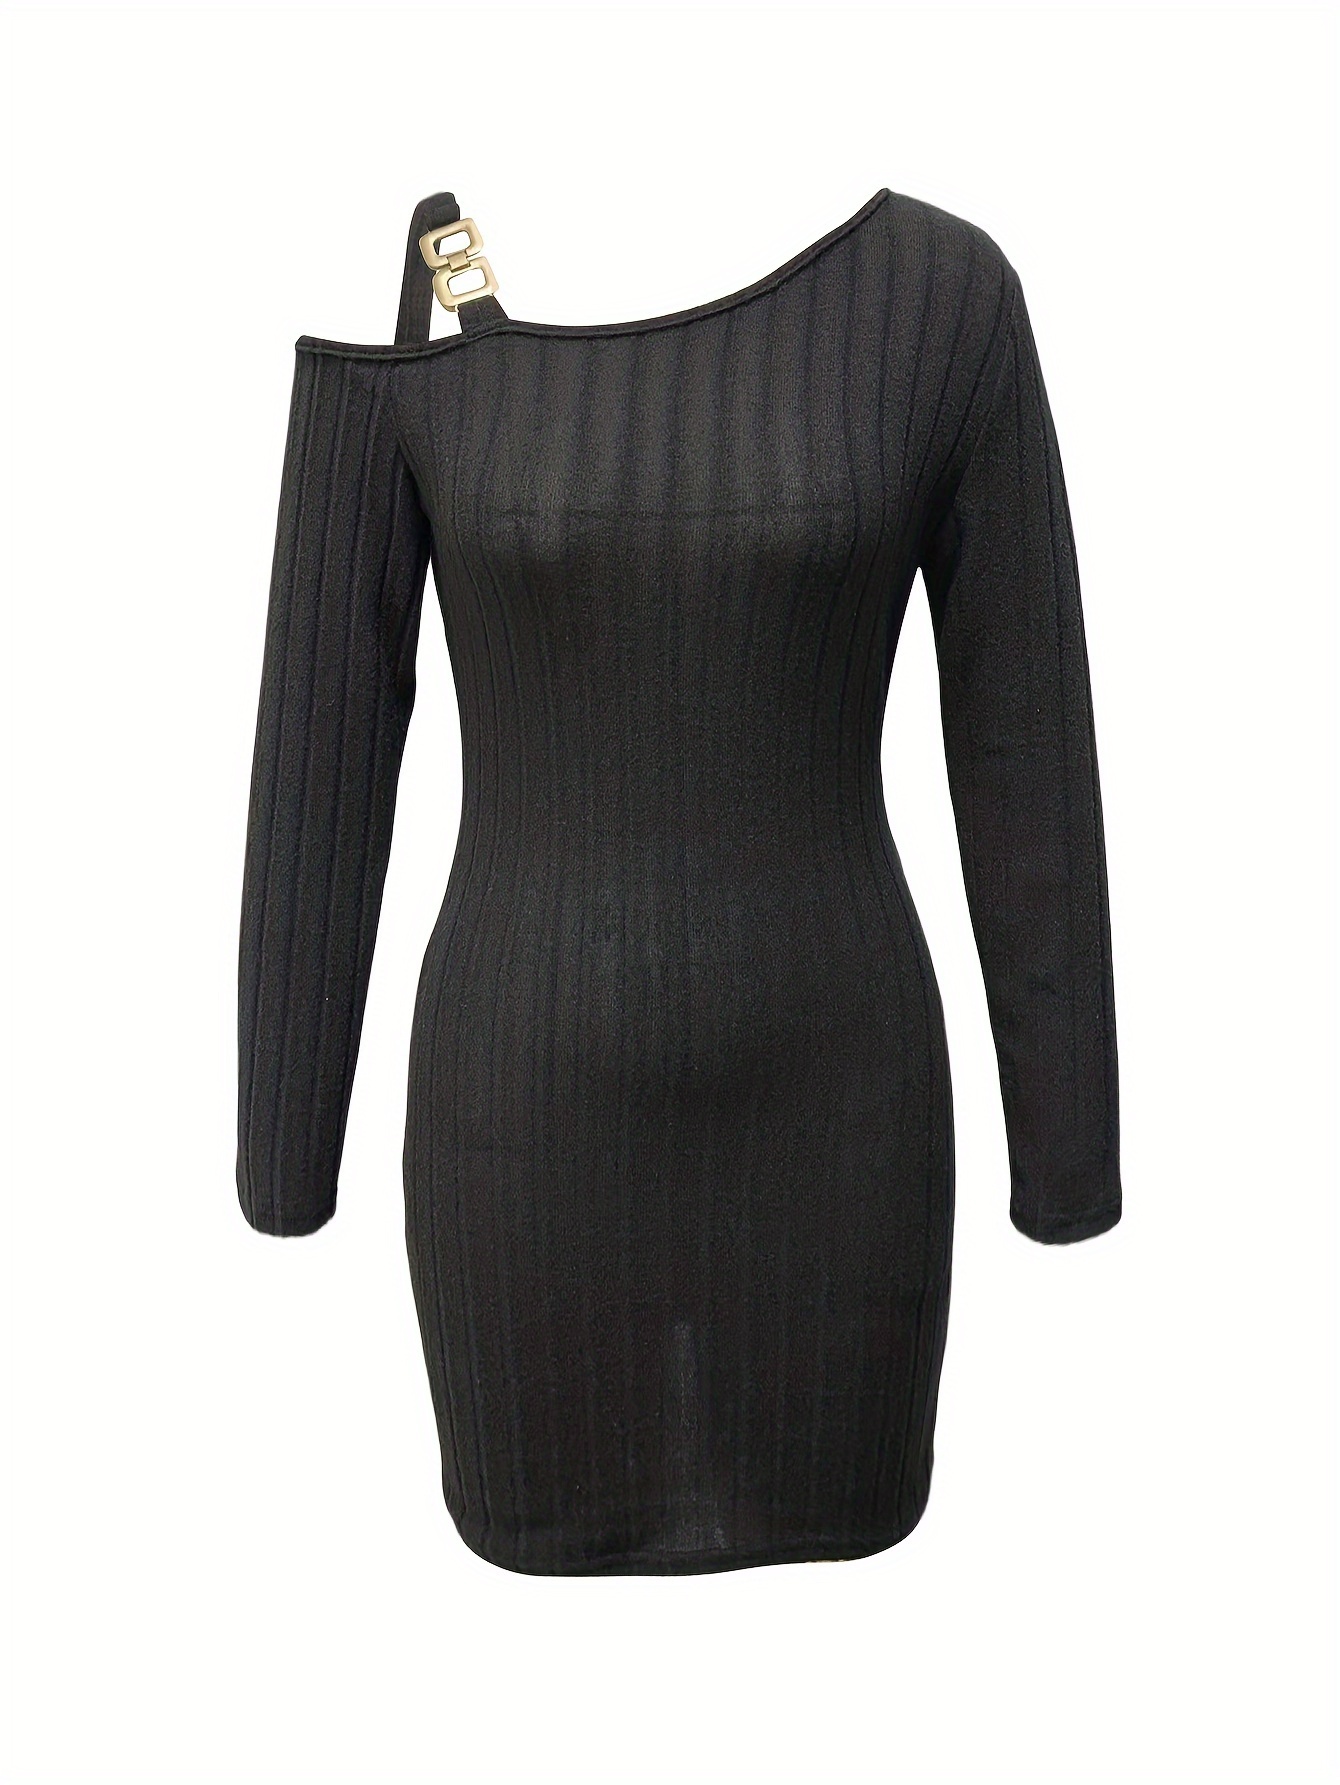 ribbed slanted shoulder dress party wear solid long sleeve mini dress womens clothing details 6